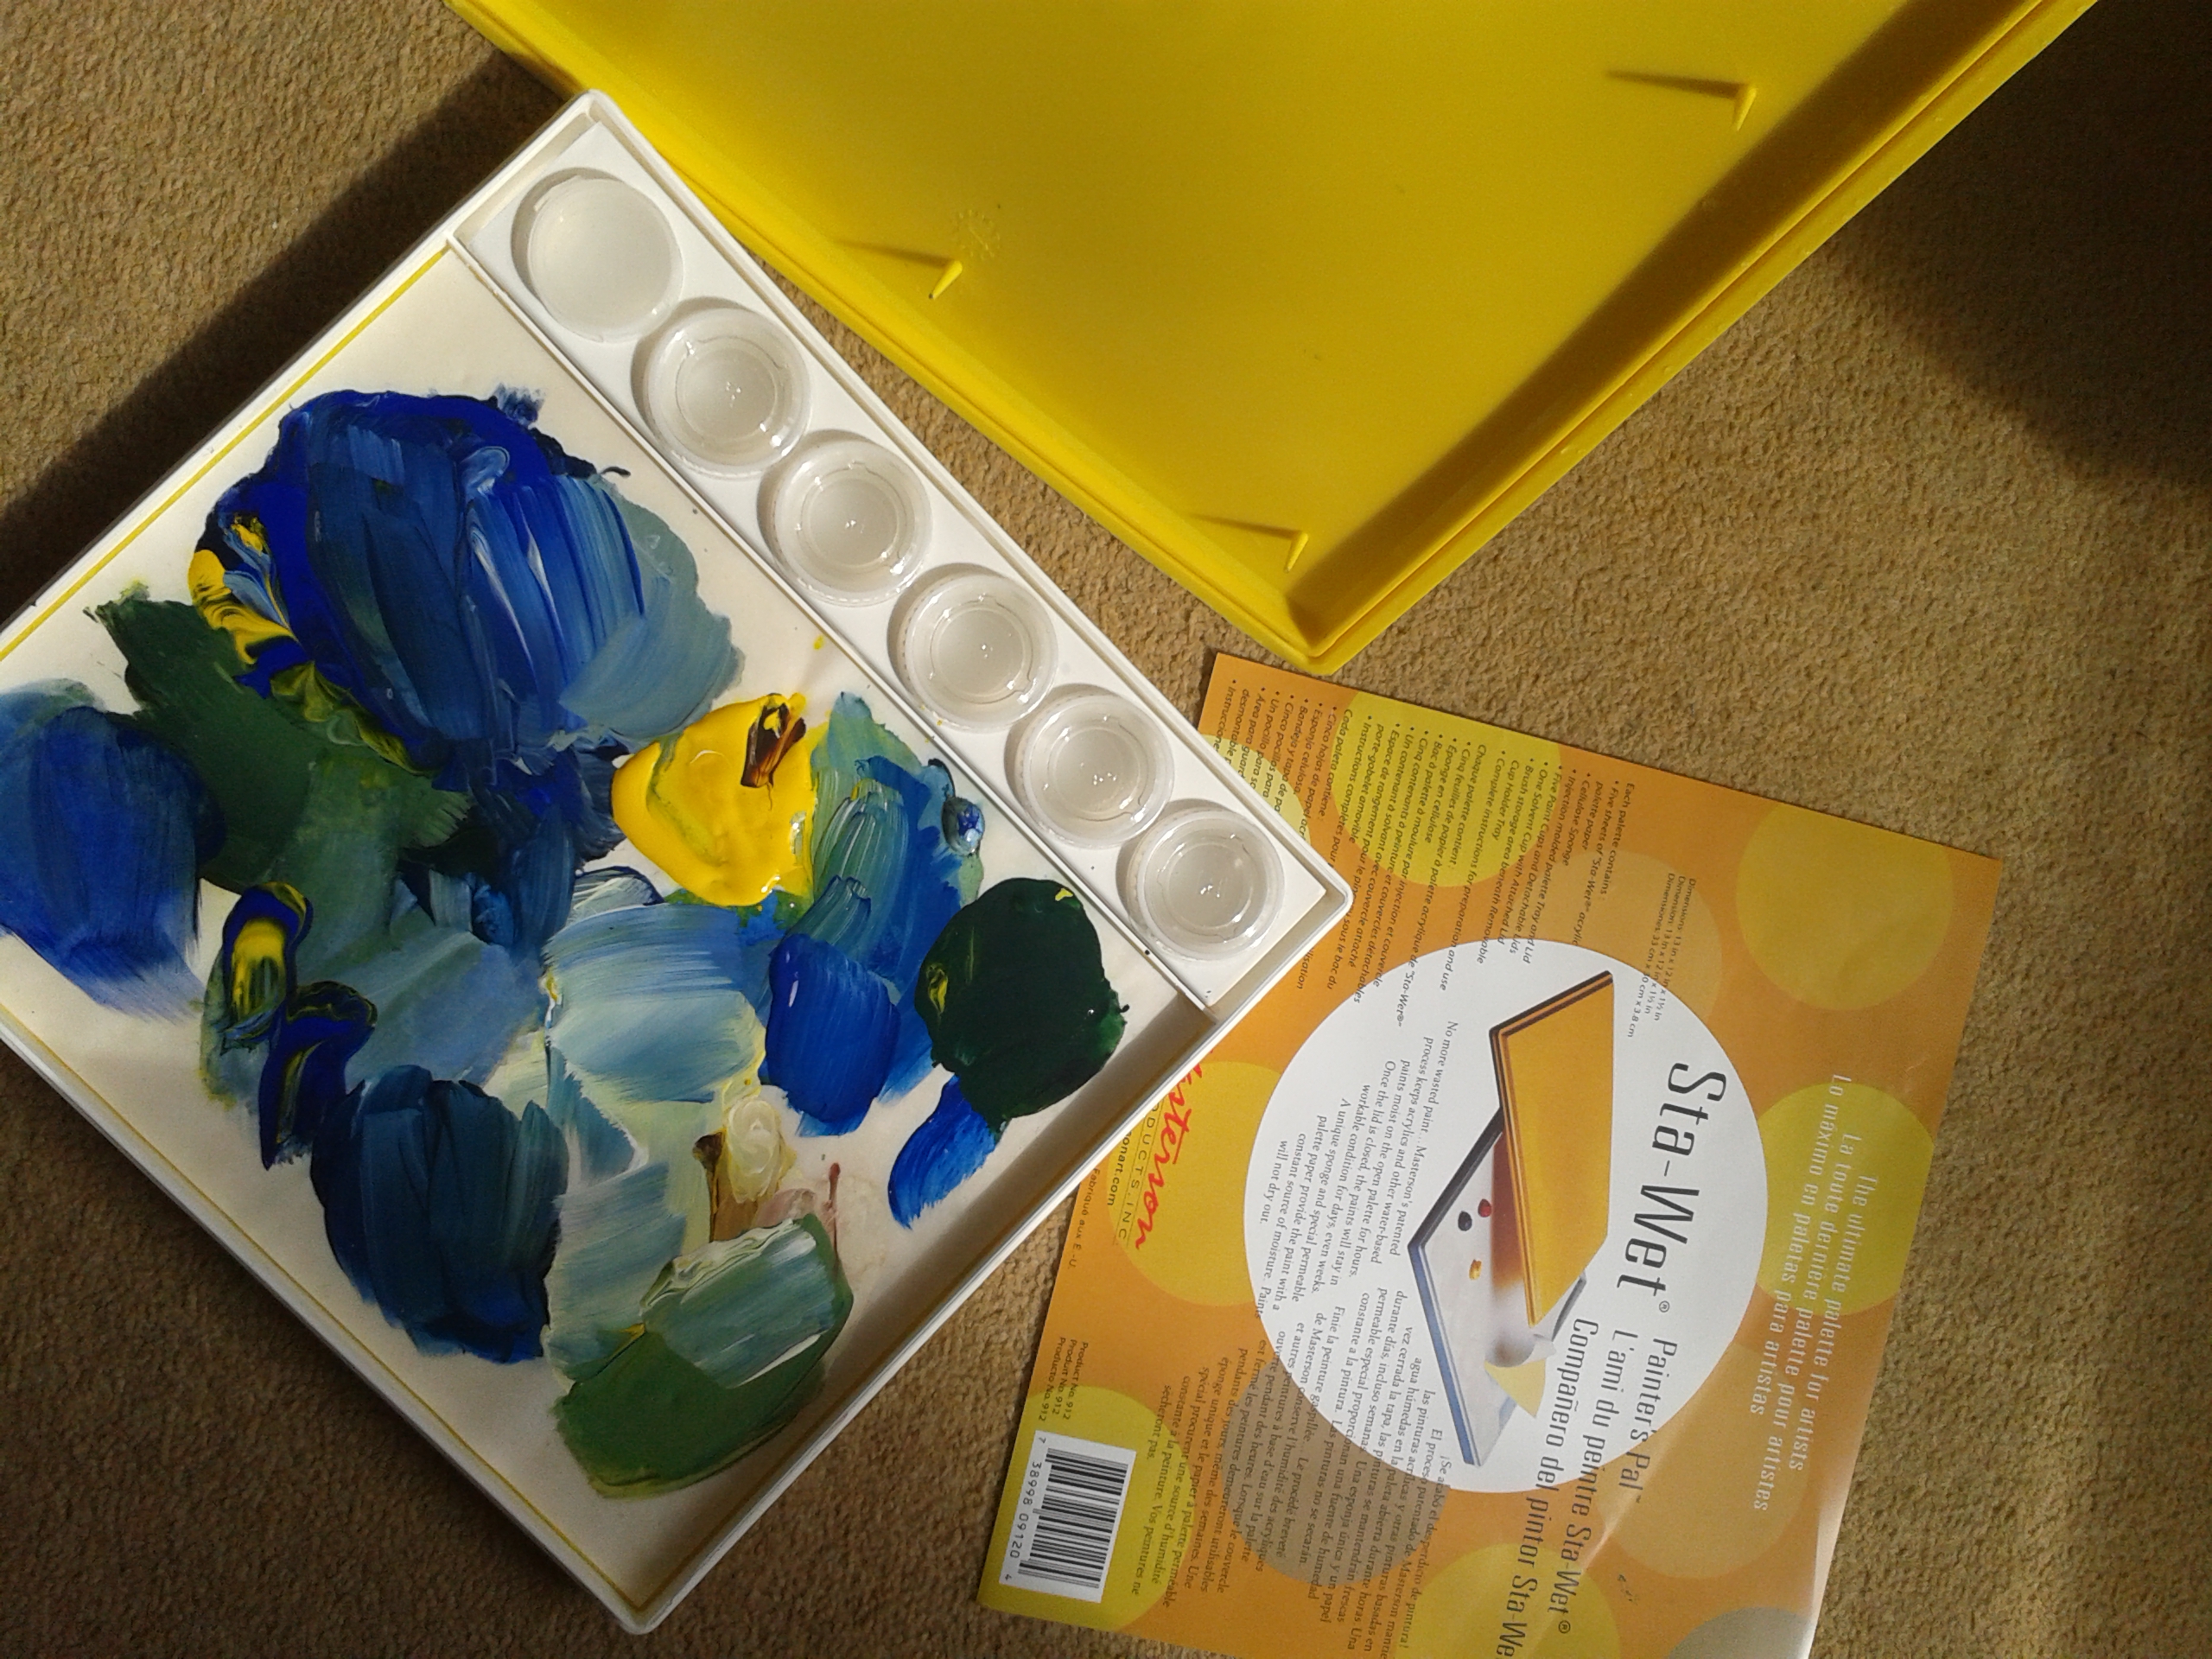 Using special Sta-Wet palettes with acrylic paints…